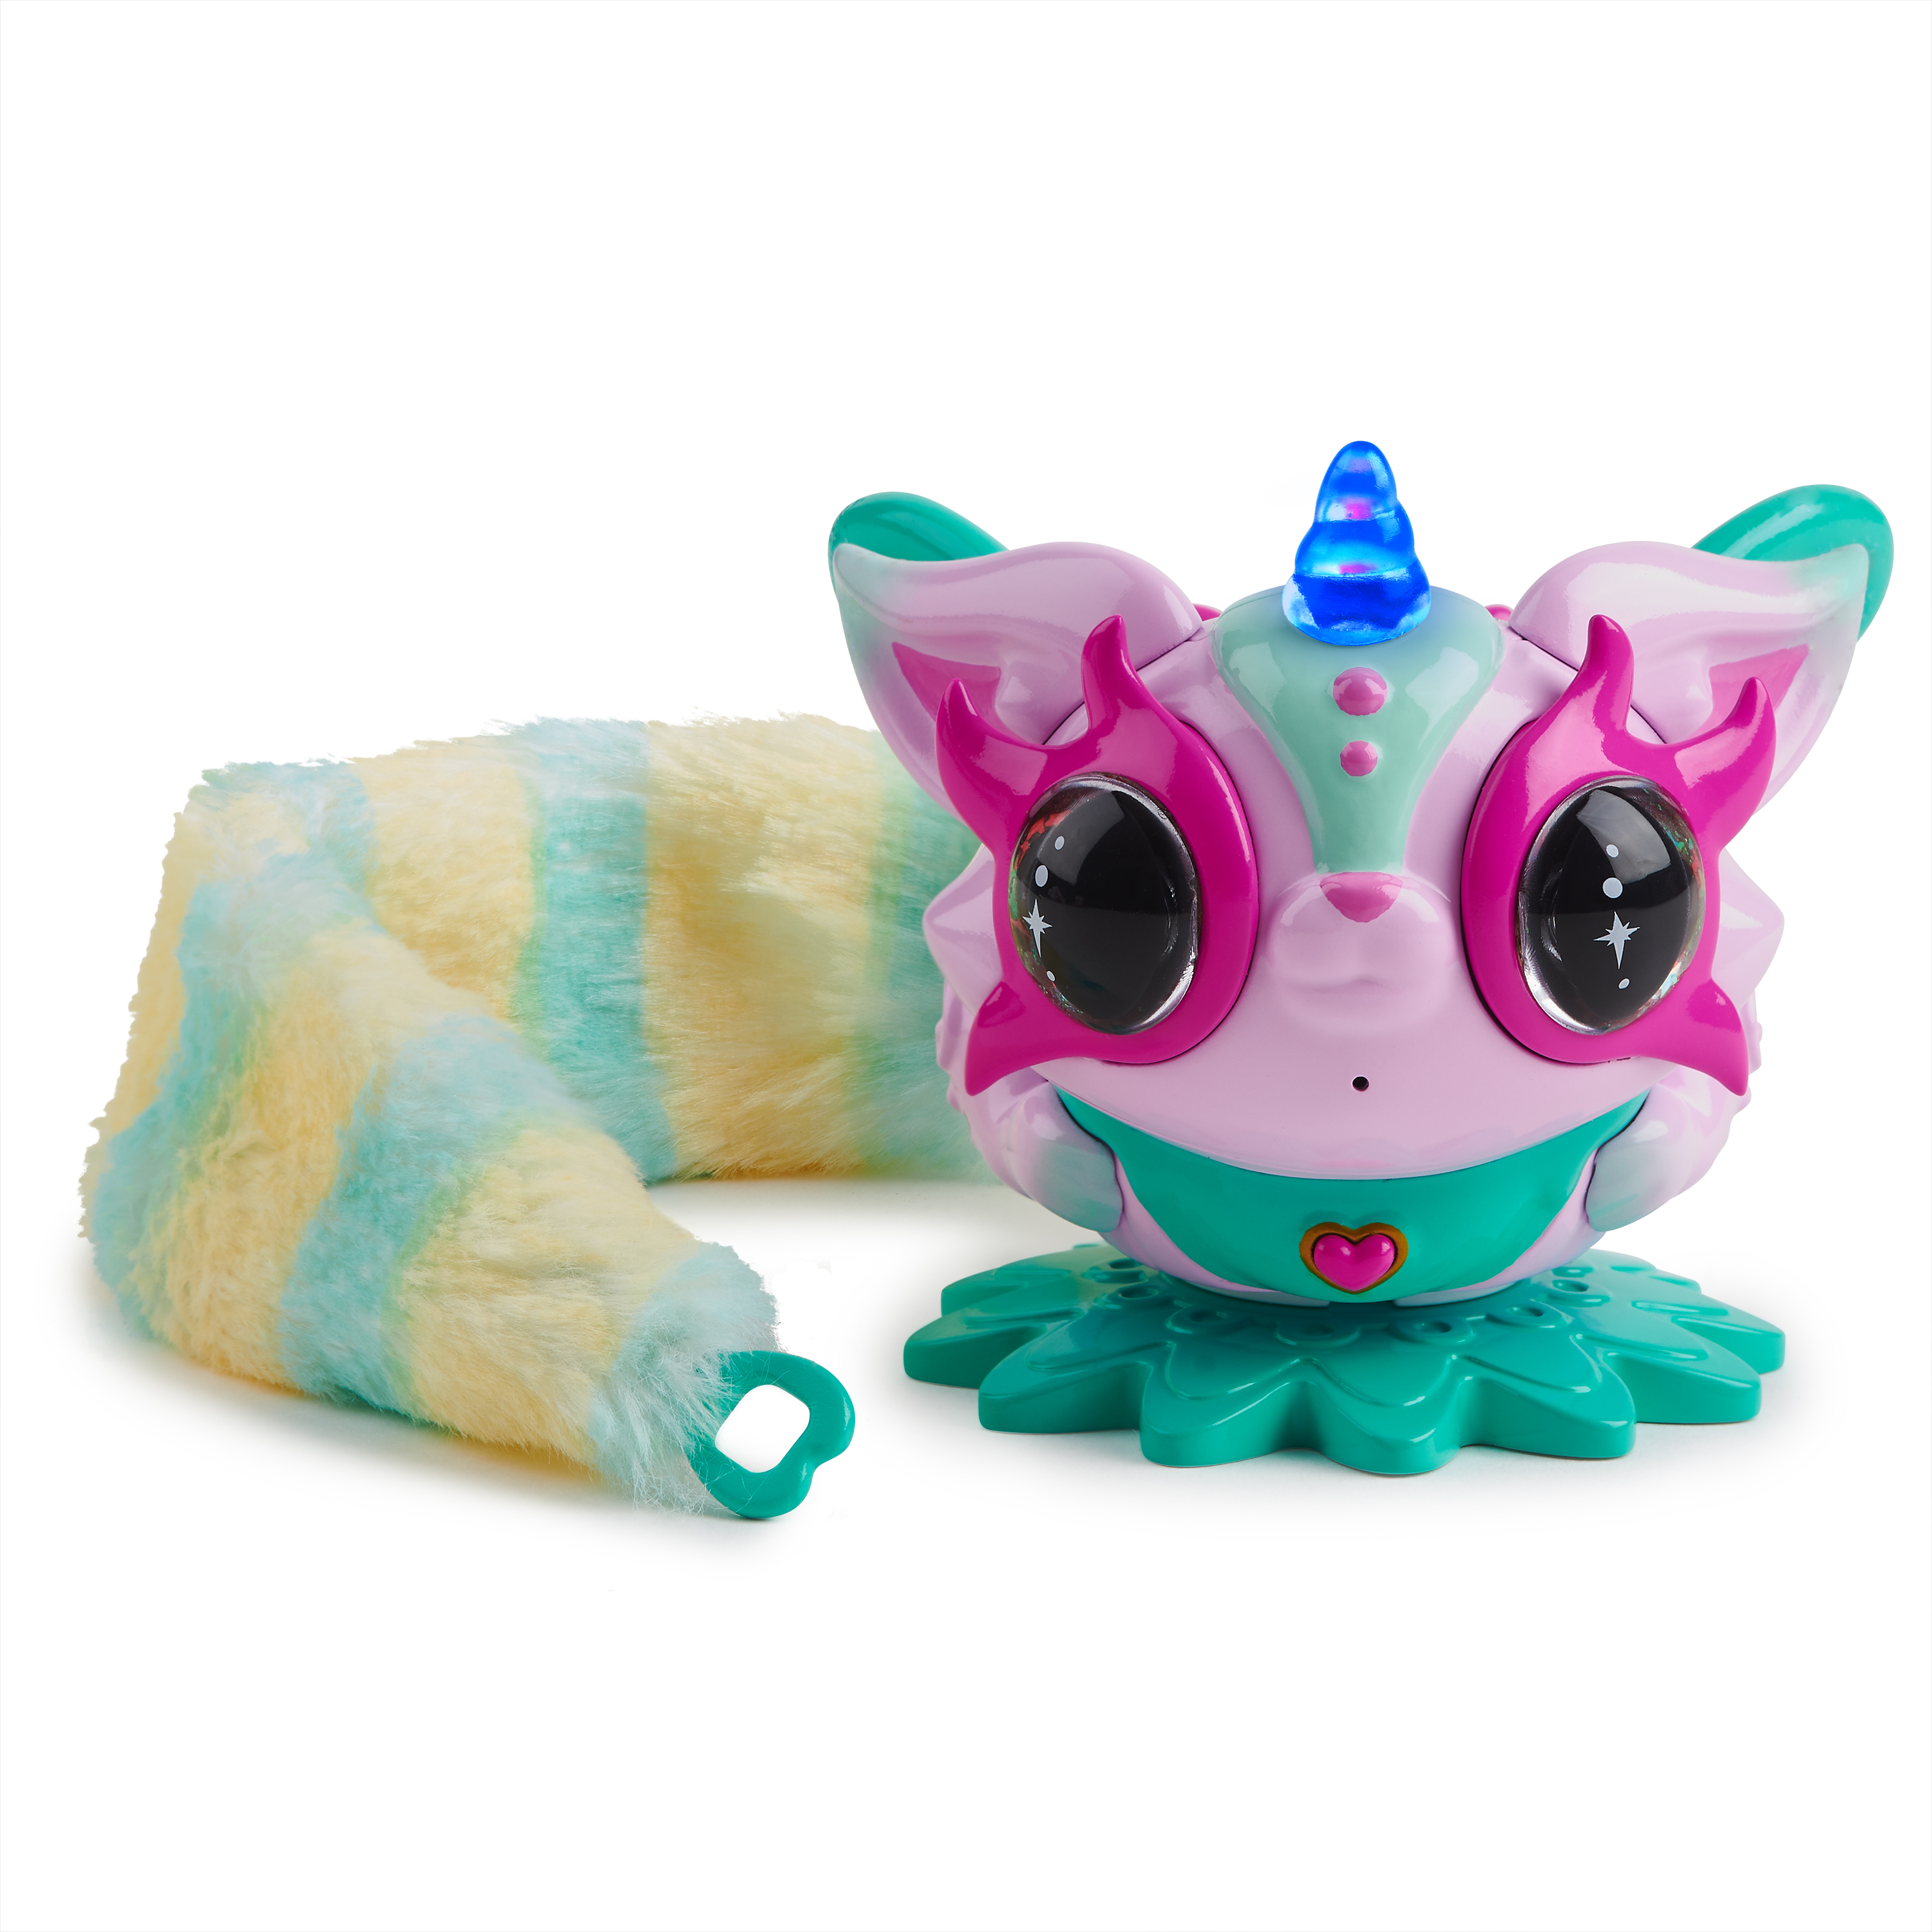 Pixie Belles - Rosie (Pink) - Interactive Electronic Pet with Bonus Tail - image 1 of 7